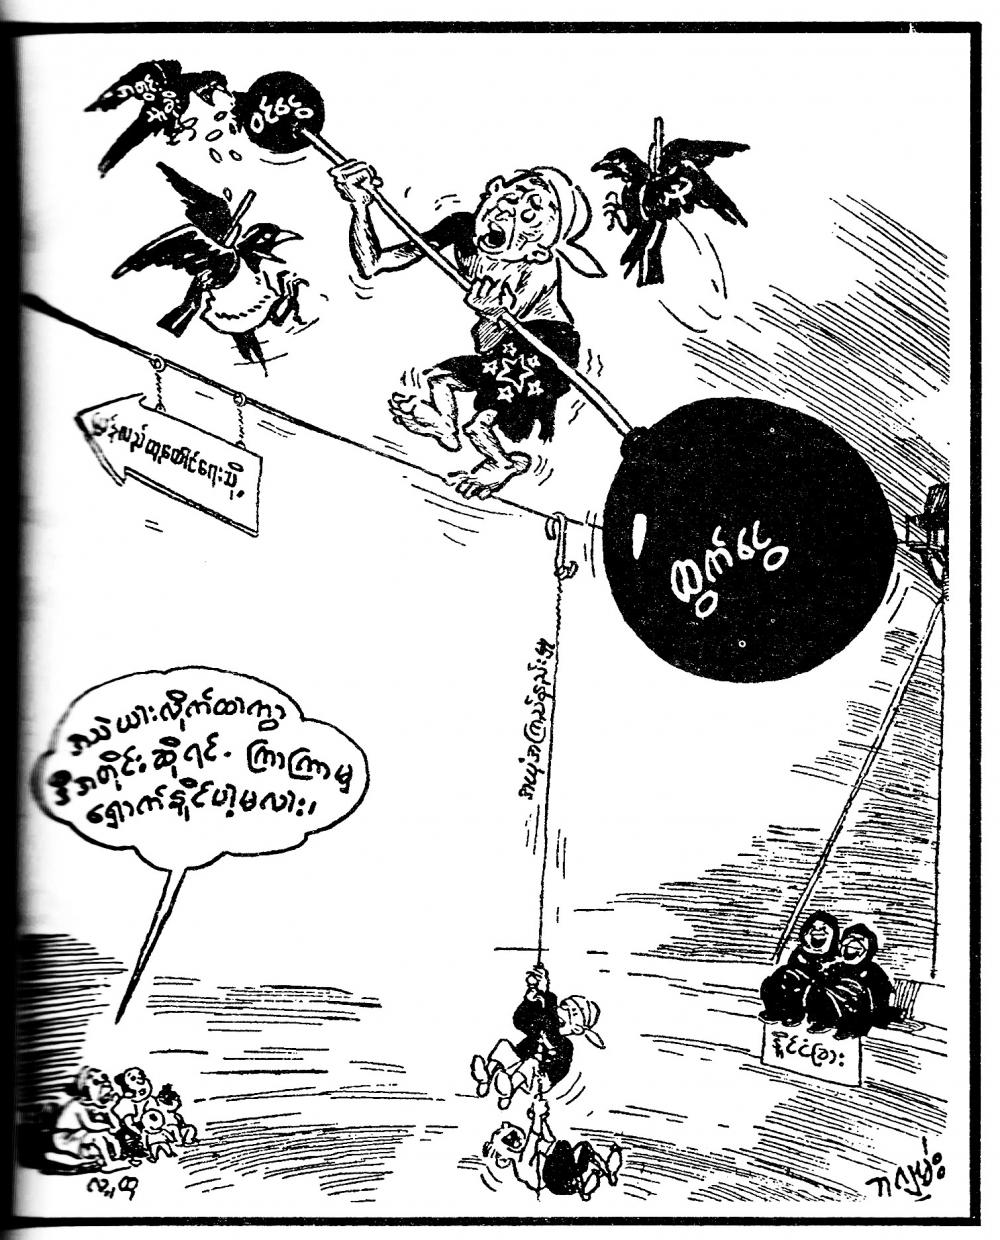 This Ba Gyan cartoon depicts a man on a tightrope. The publication date is unknown, but likely to be around 1950.